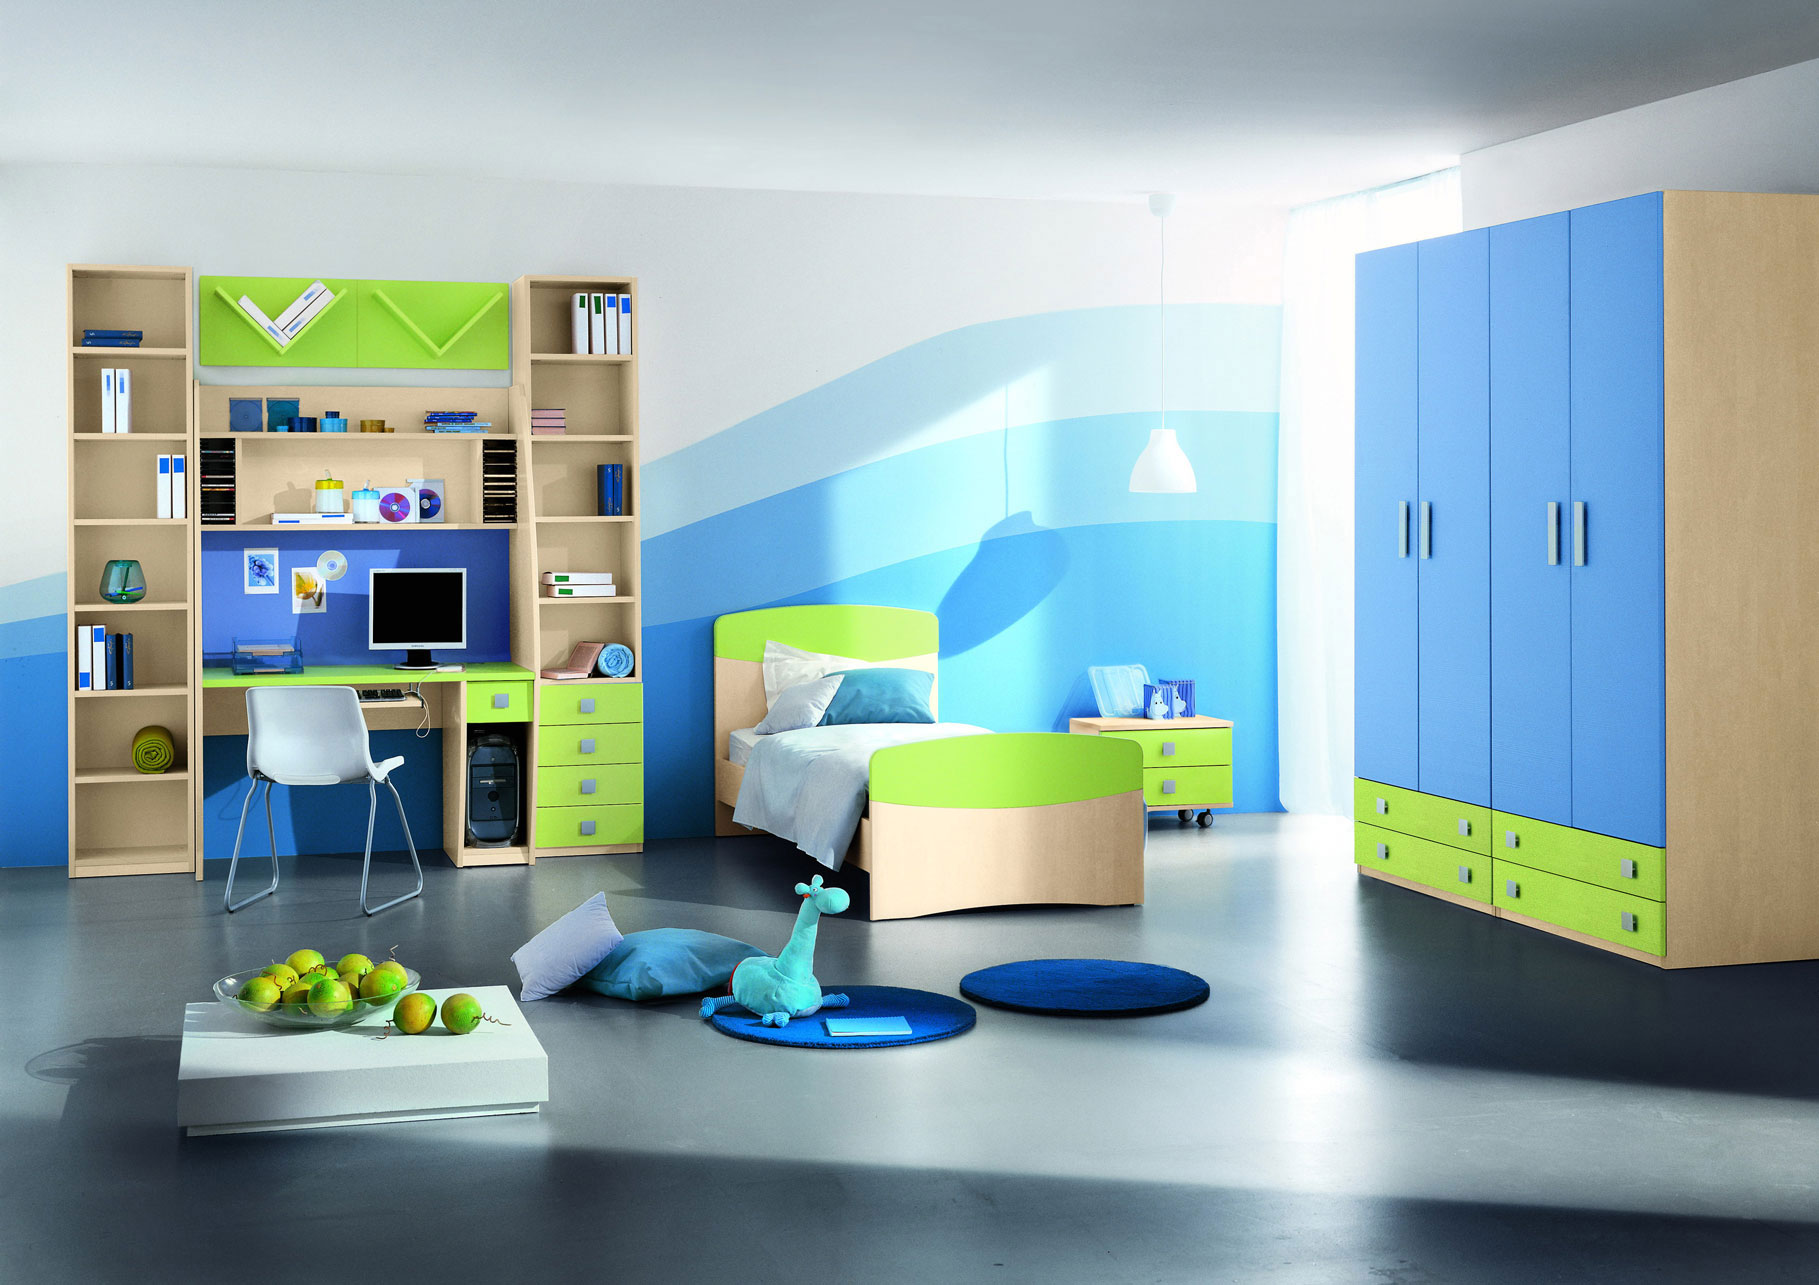 Kids Room Applying Captivating Kids Room Paint Ideas Applying White And Blue Color Furnished With Single Bed And Nightstand Also Completed With Desk And Cupboard Plus Pendant Lamp Kids Room Colorful And Pattern Kids Room Paint Ideas